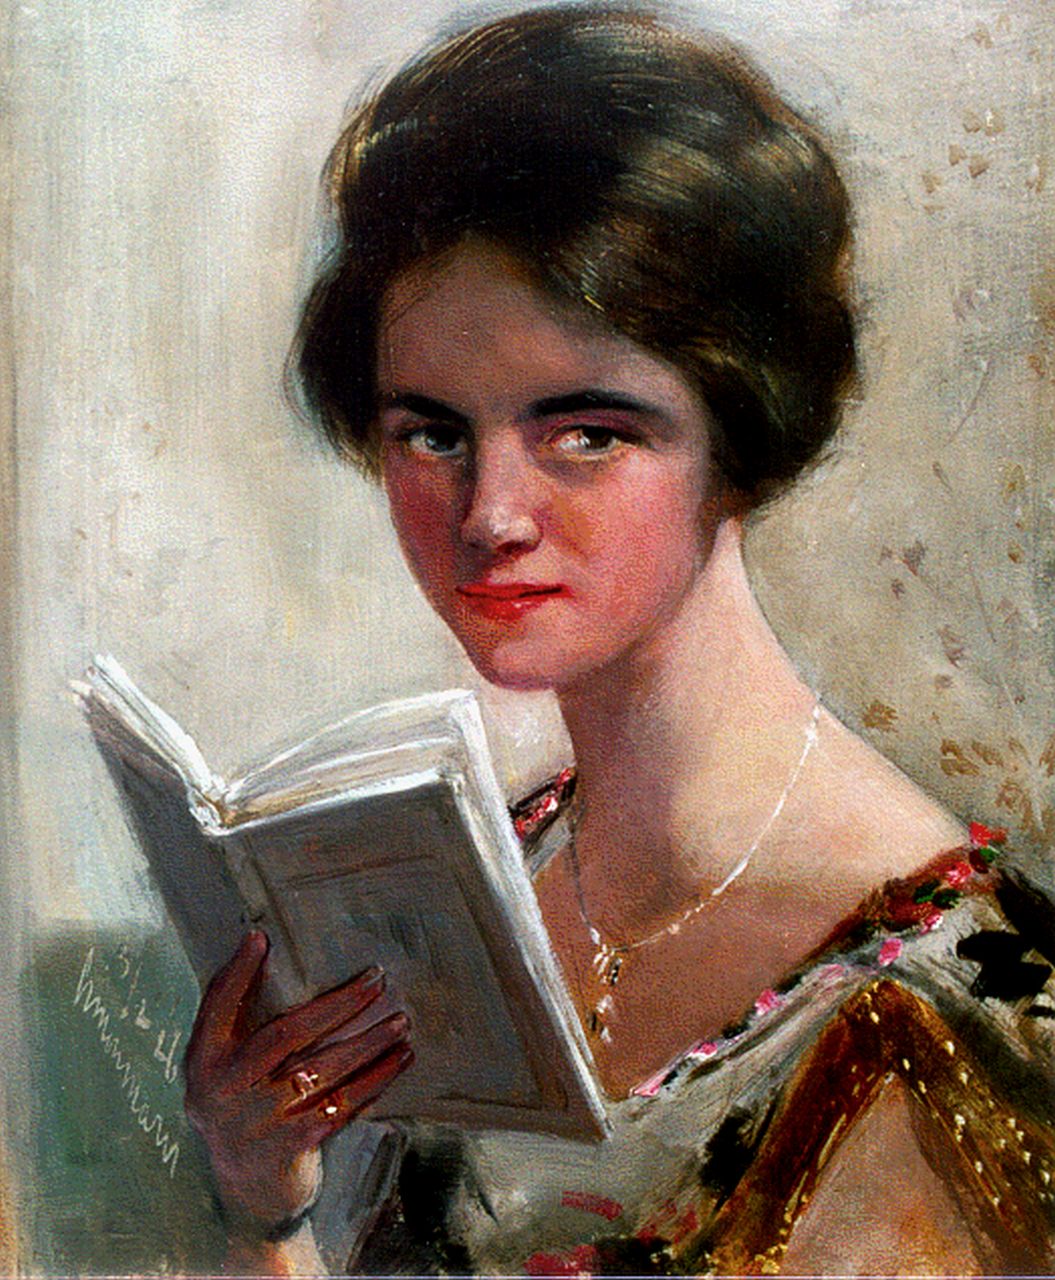 Maris S.W.  | Simon Willem Maris, A portrait of an elegant lady reading, oil on canvas laid down on painter's board 24.0 x 20.1 cm, signed l.l. and executed 3/2/26